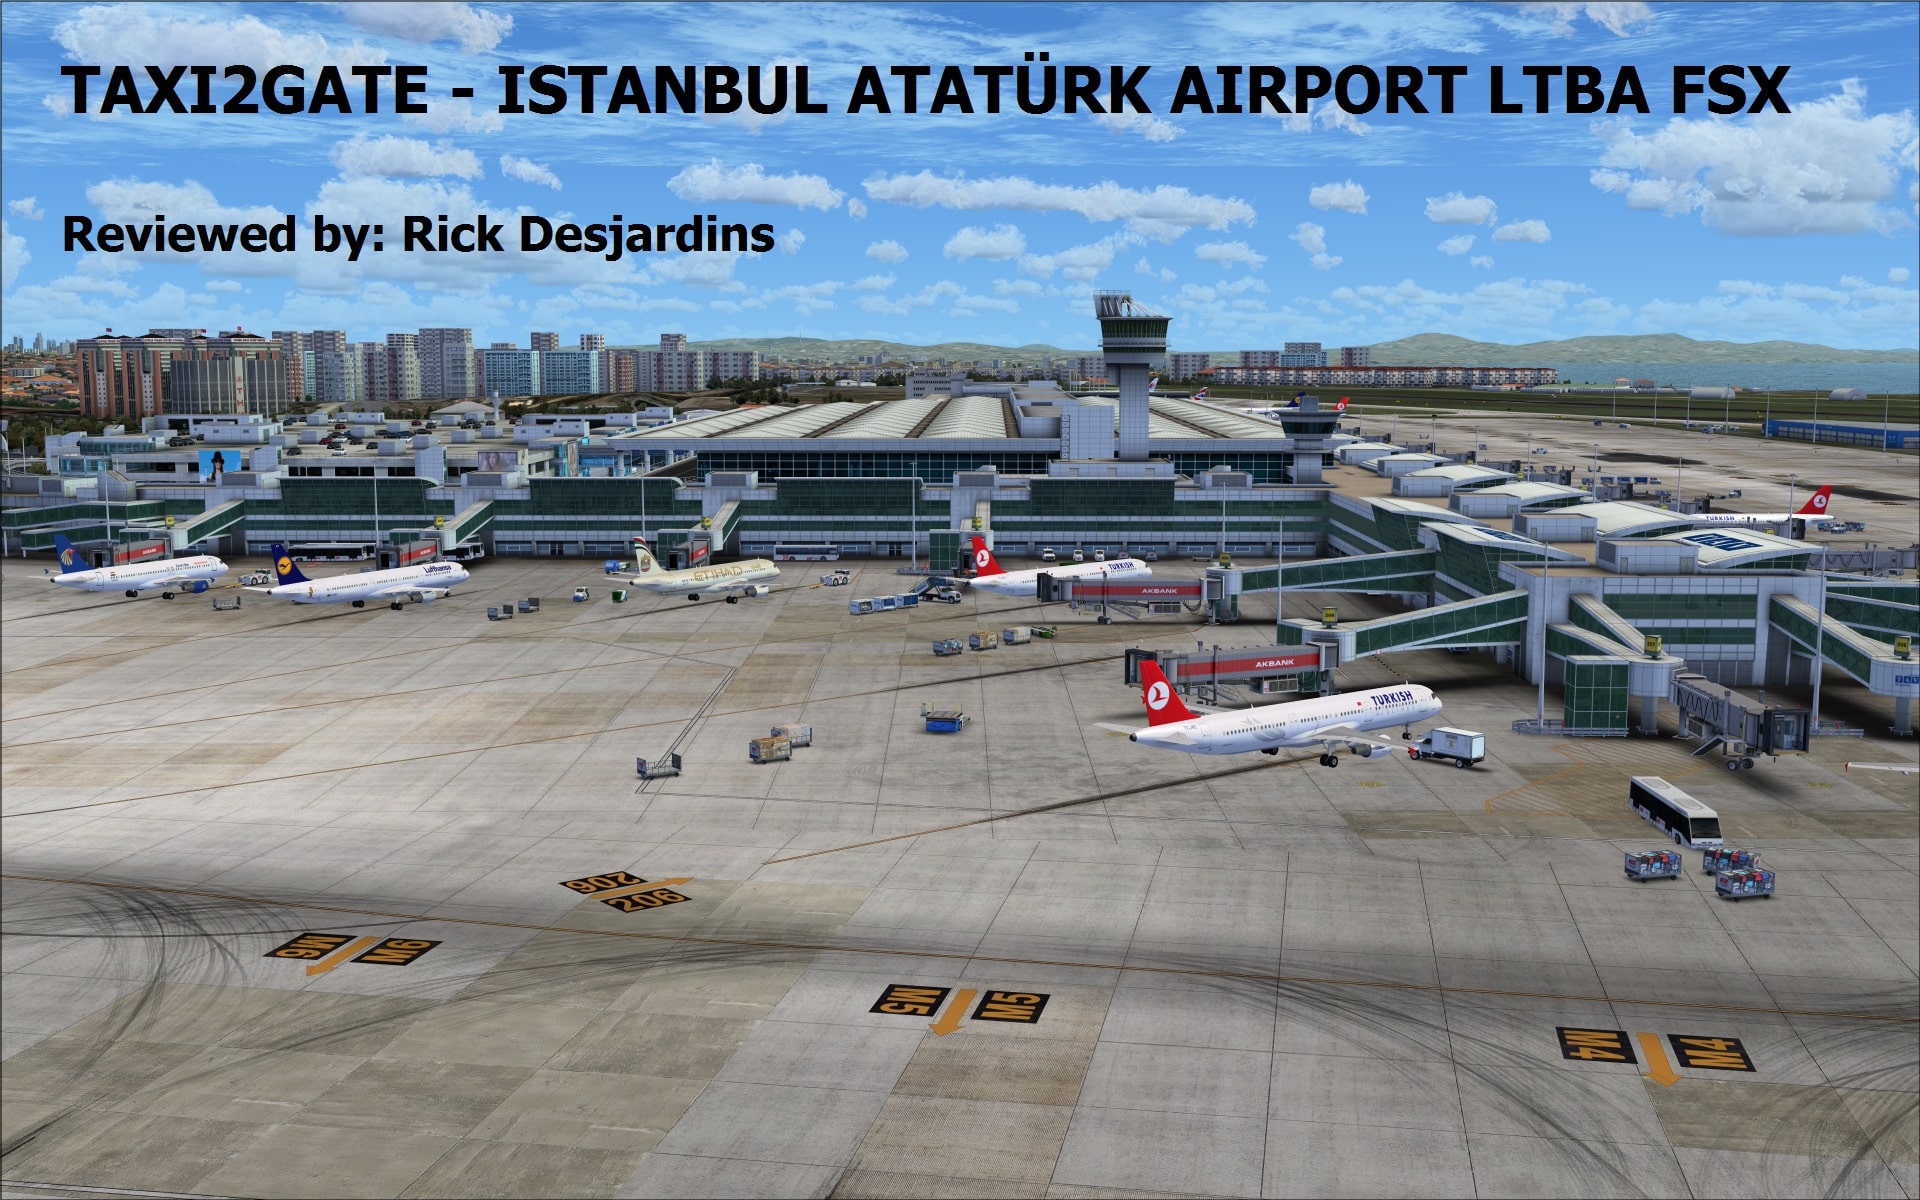 review of taxi2gate istanbul ataturk airport ltba fsx